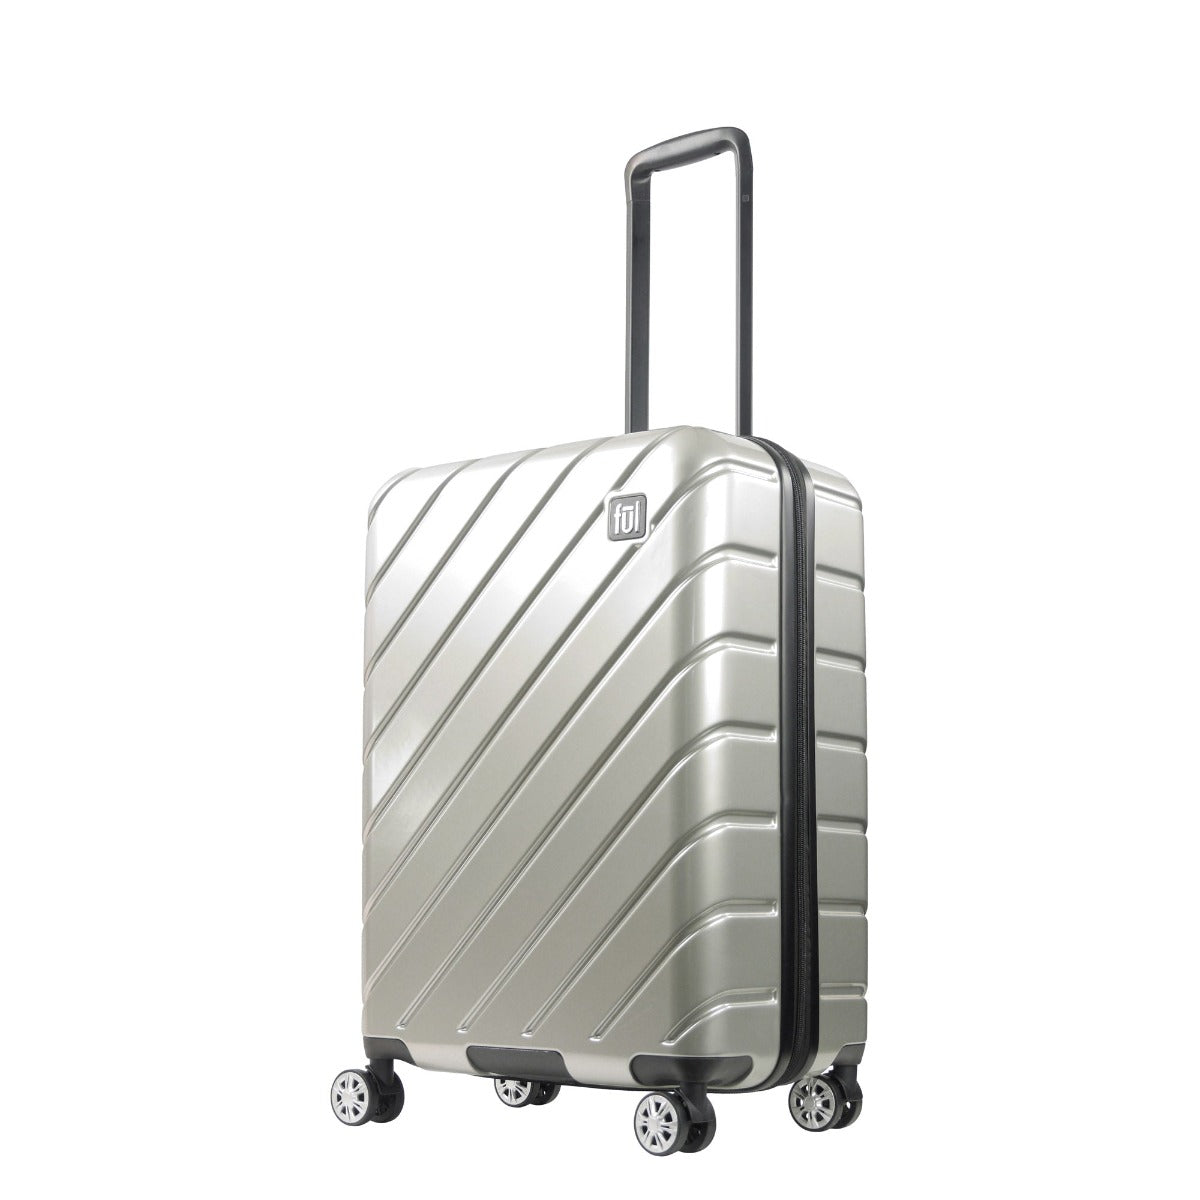 Ful Velocity 27" Expandable Silver Hardside Spinner Suitcase Luggage Check-in Bag